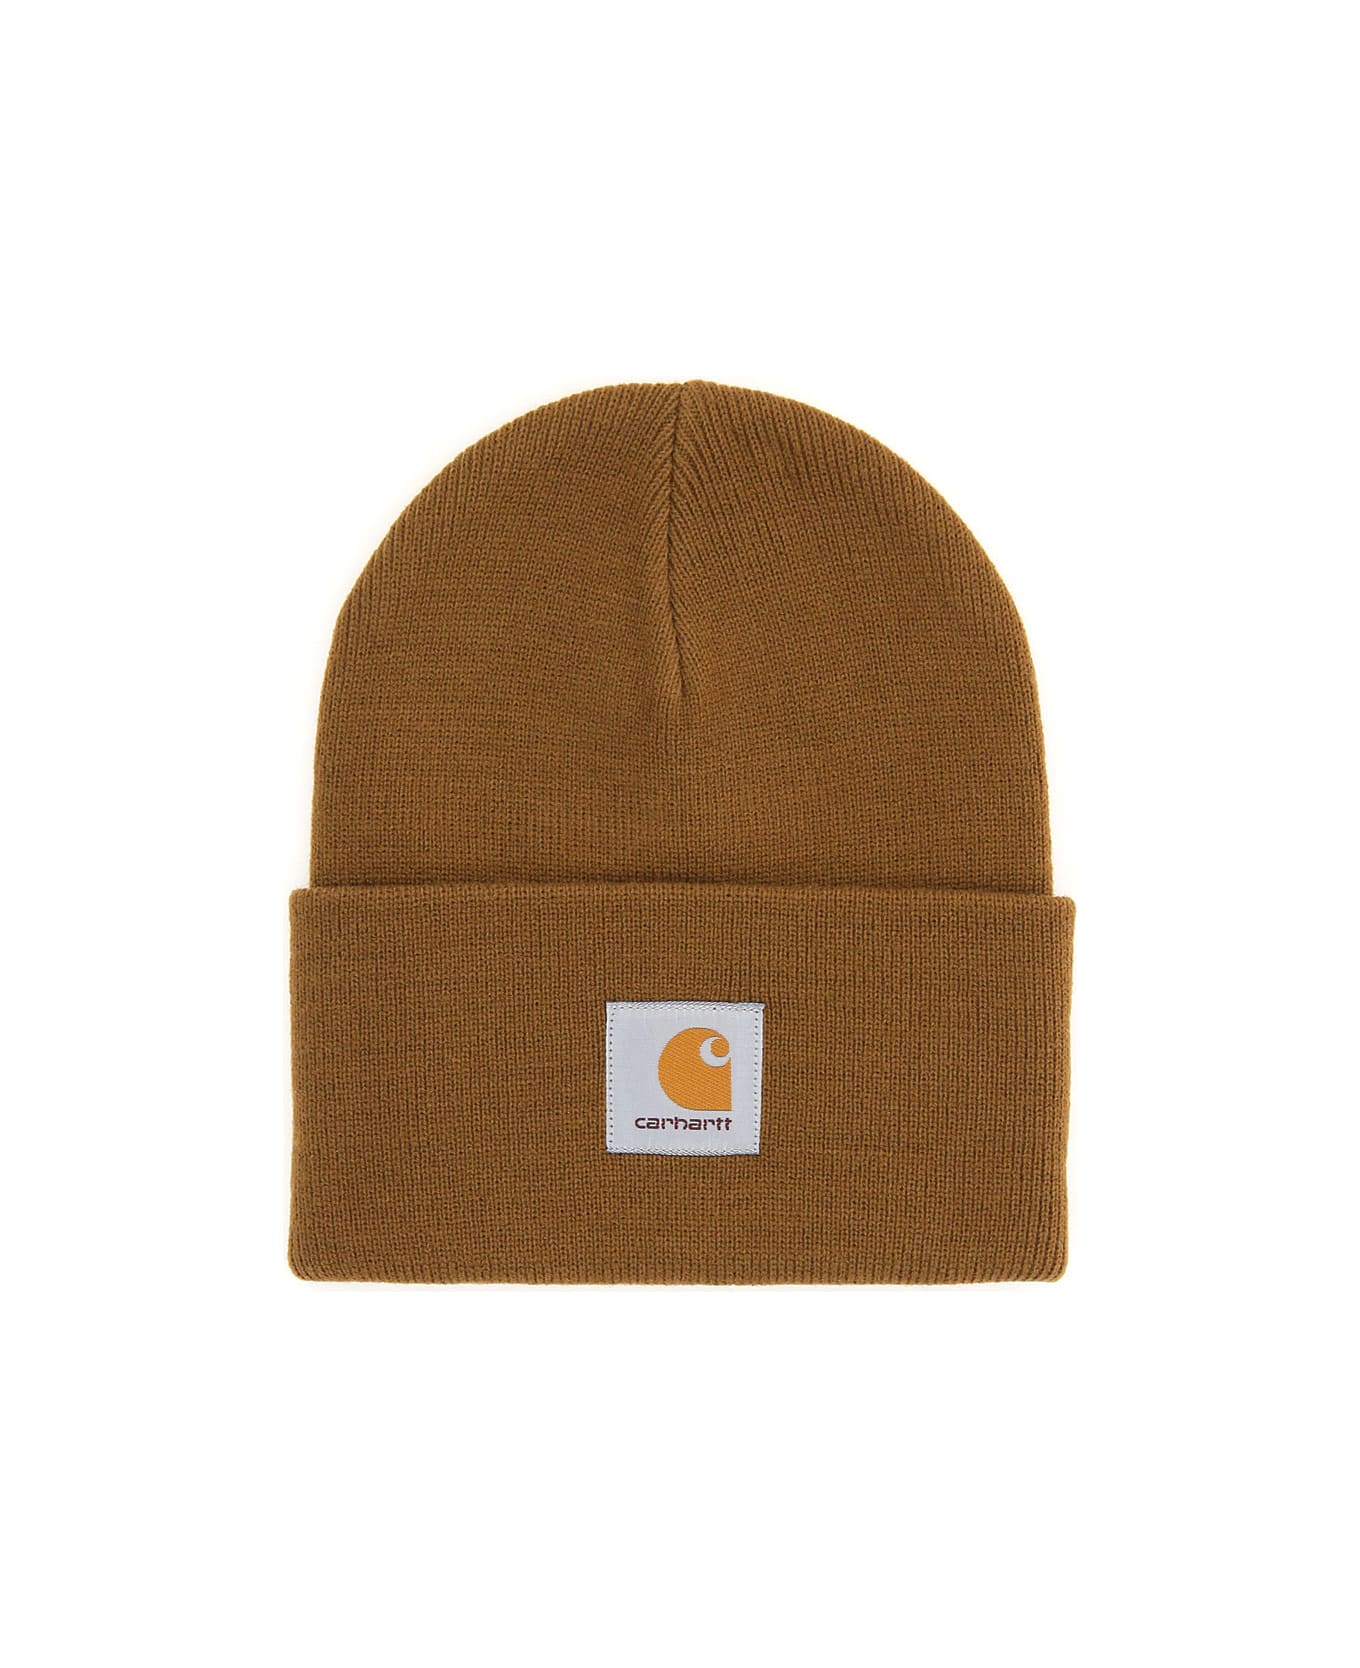 Carhartt Beanie Hat With Logo Patch - Tobacco